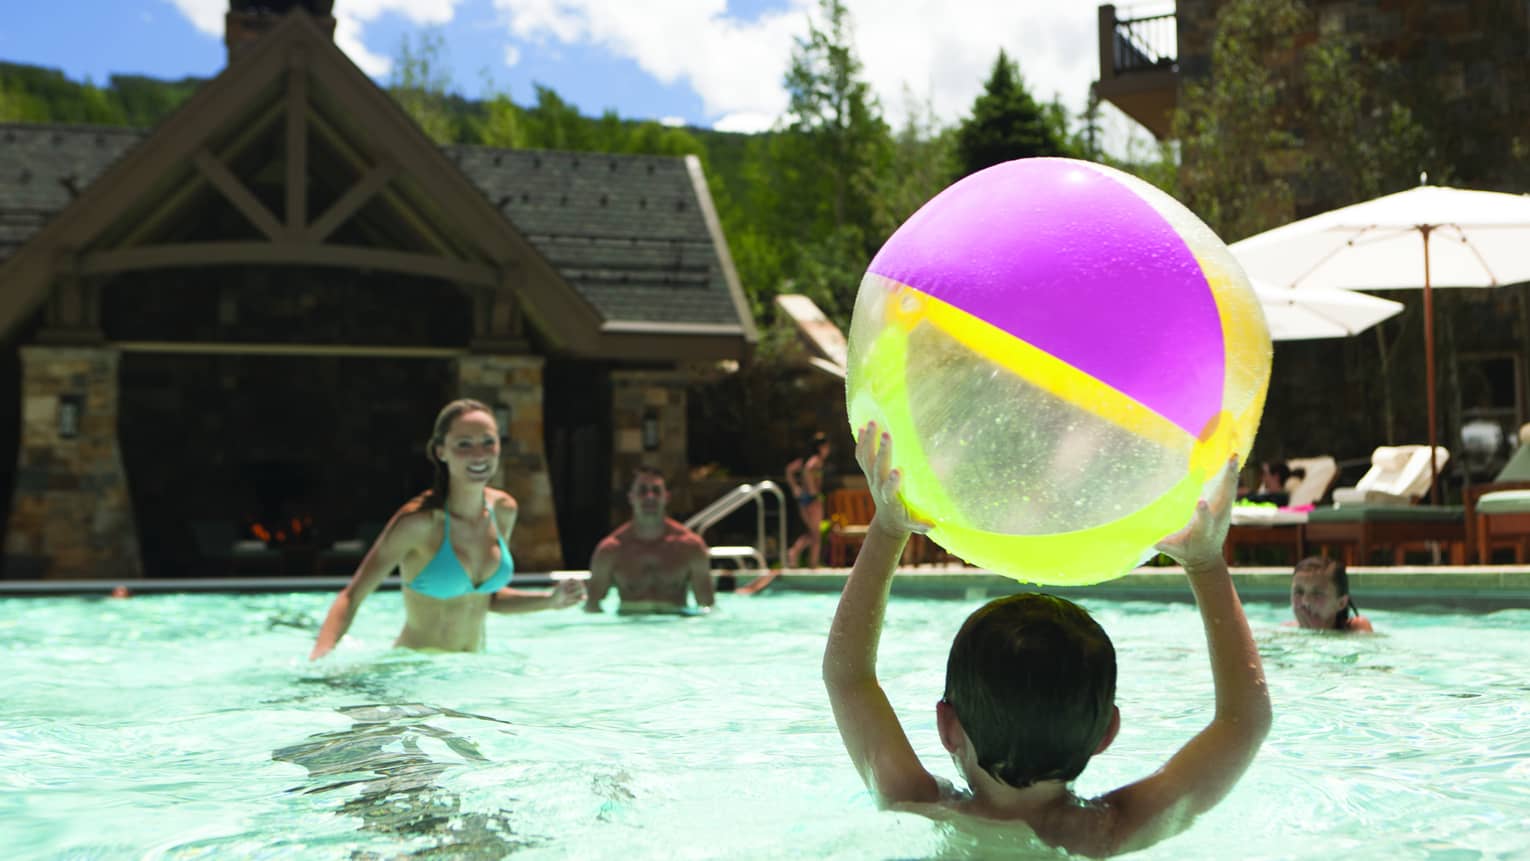 A group of children and young people playing with a beach ball in an outdoor pool.